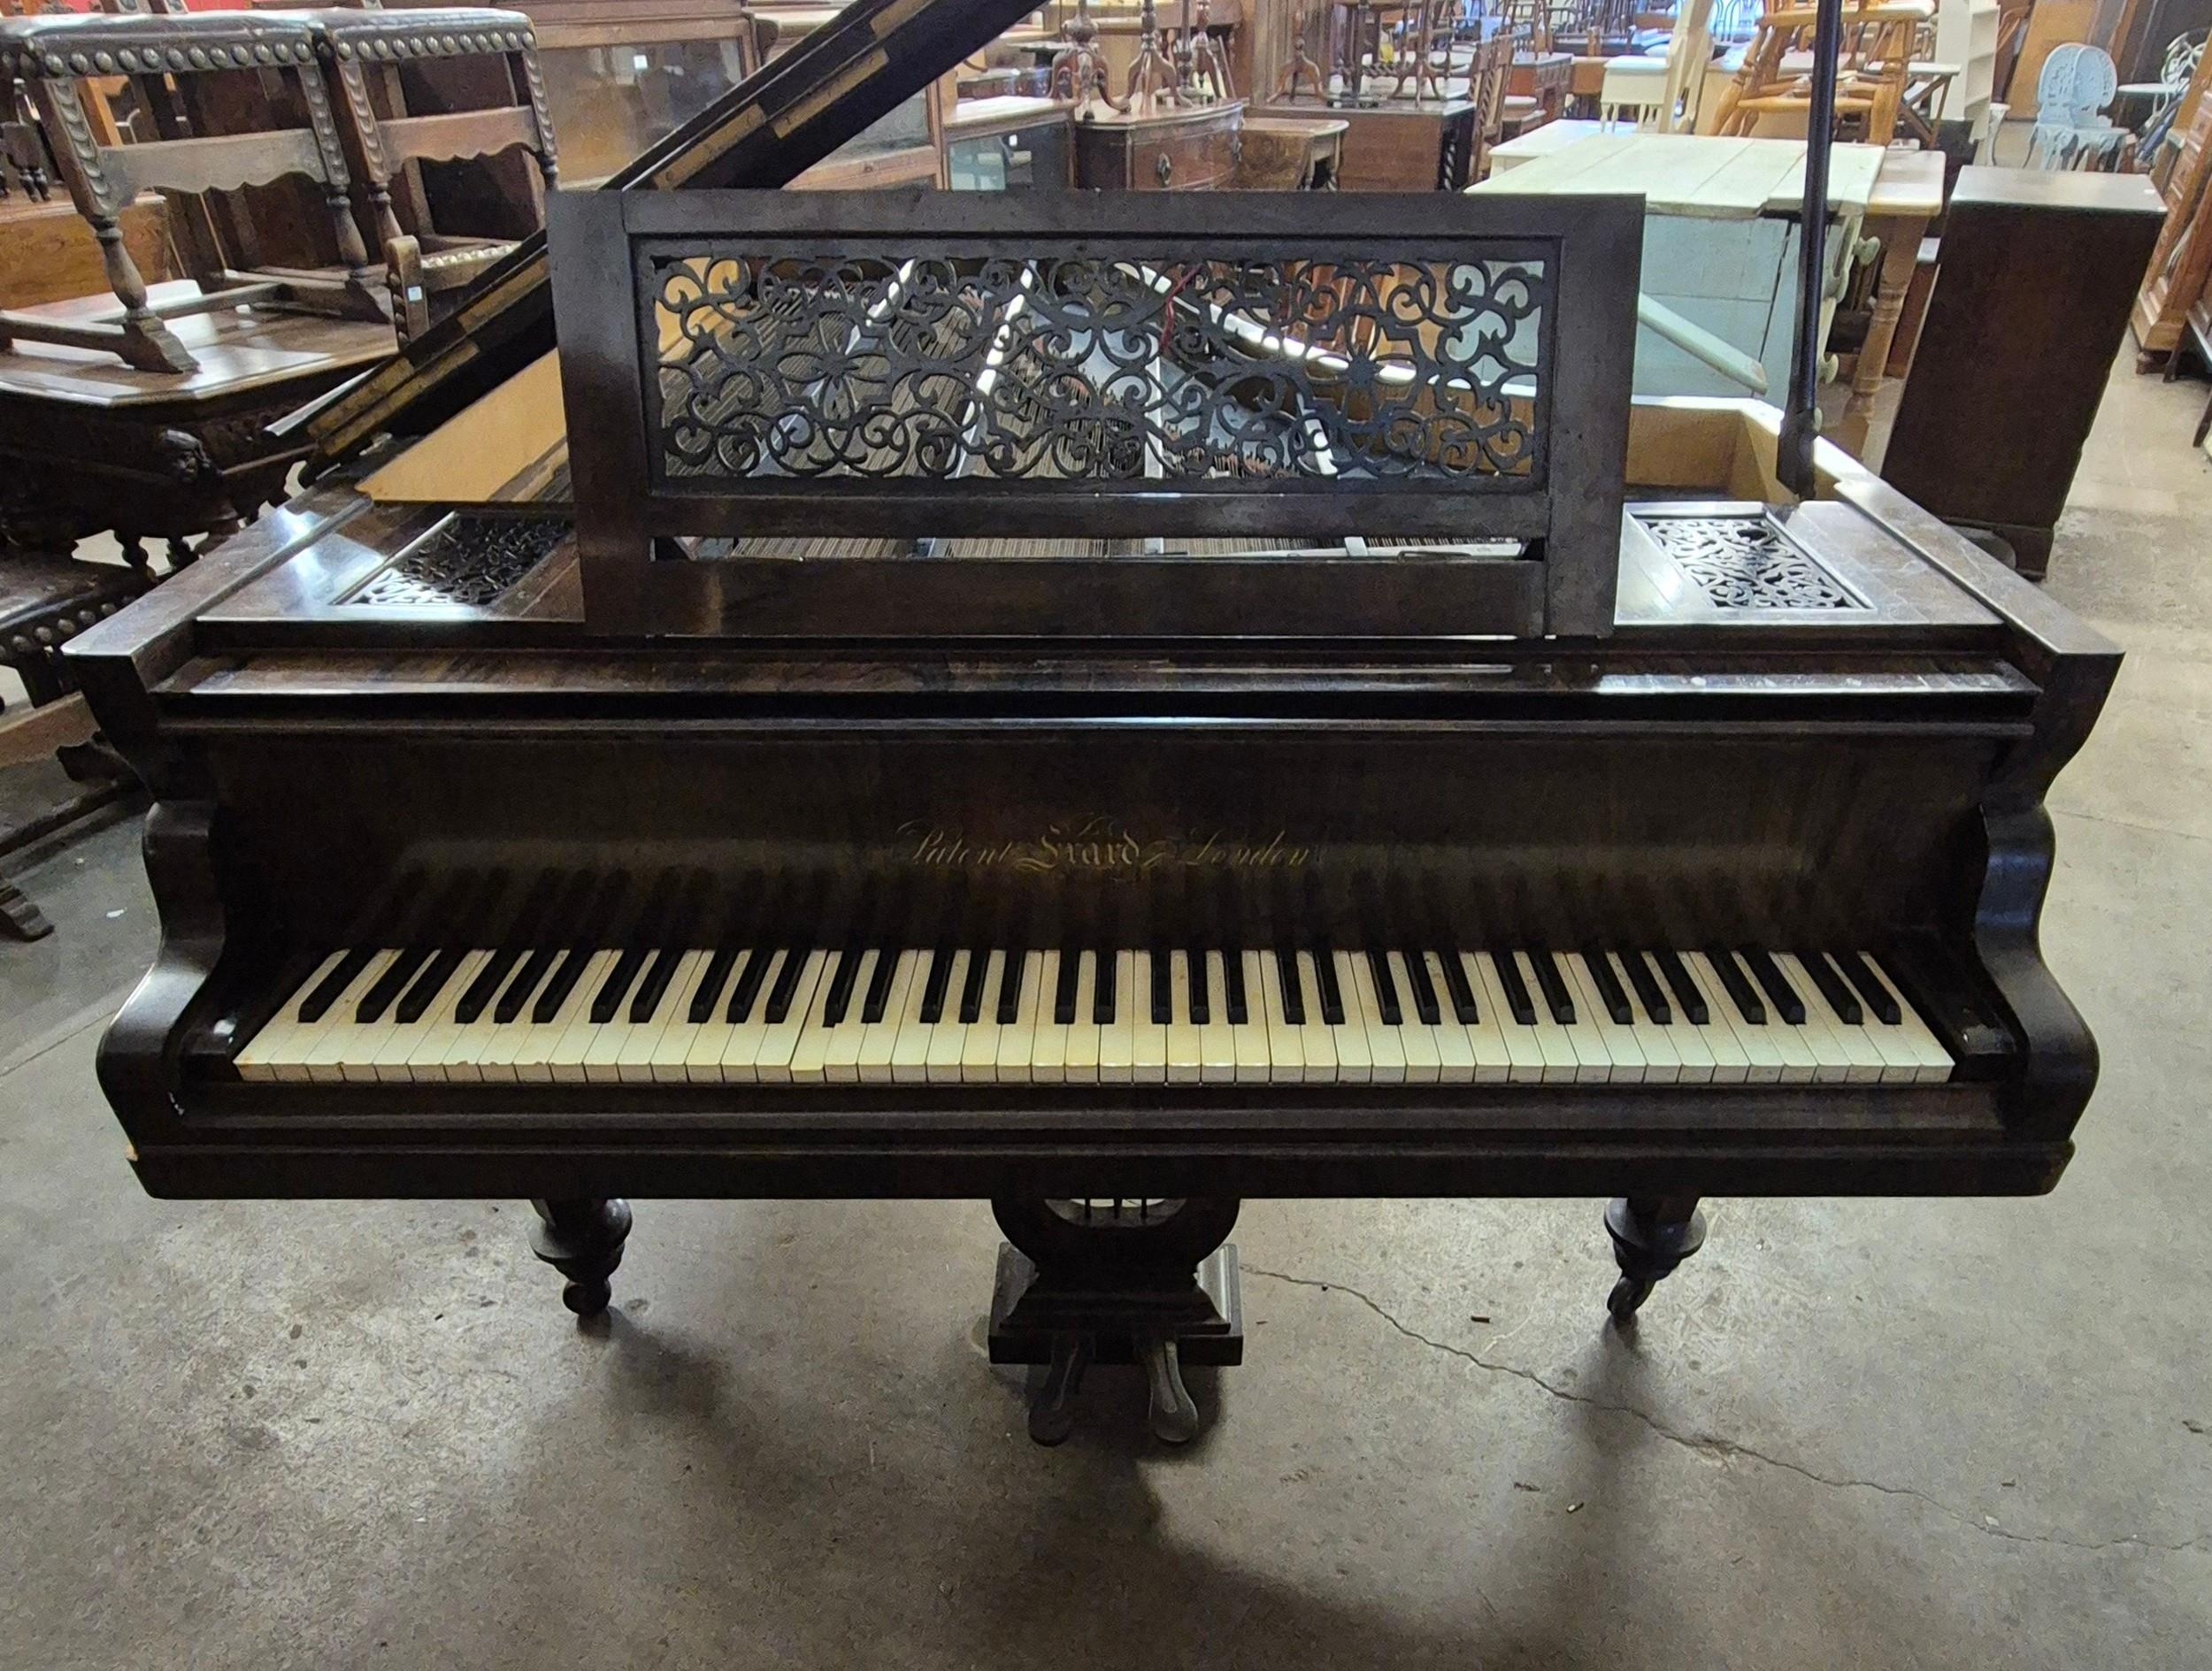 A 19th Century French Erard rosewood baby grand piano. Sold with non-transferable Standard Ivory - Image 2 of 2